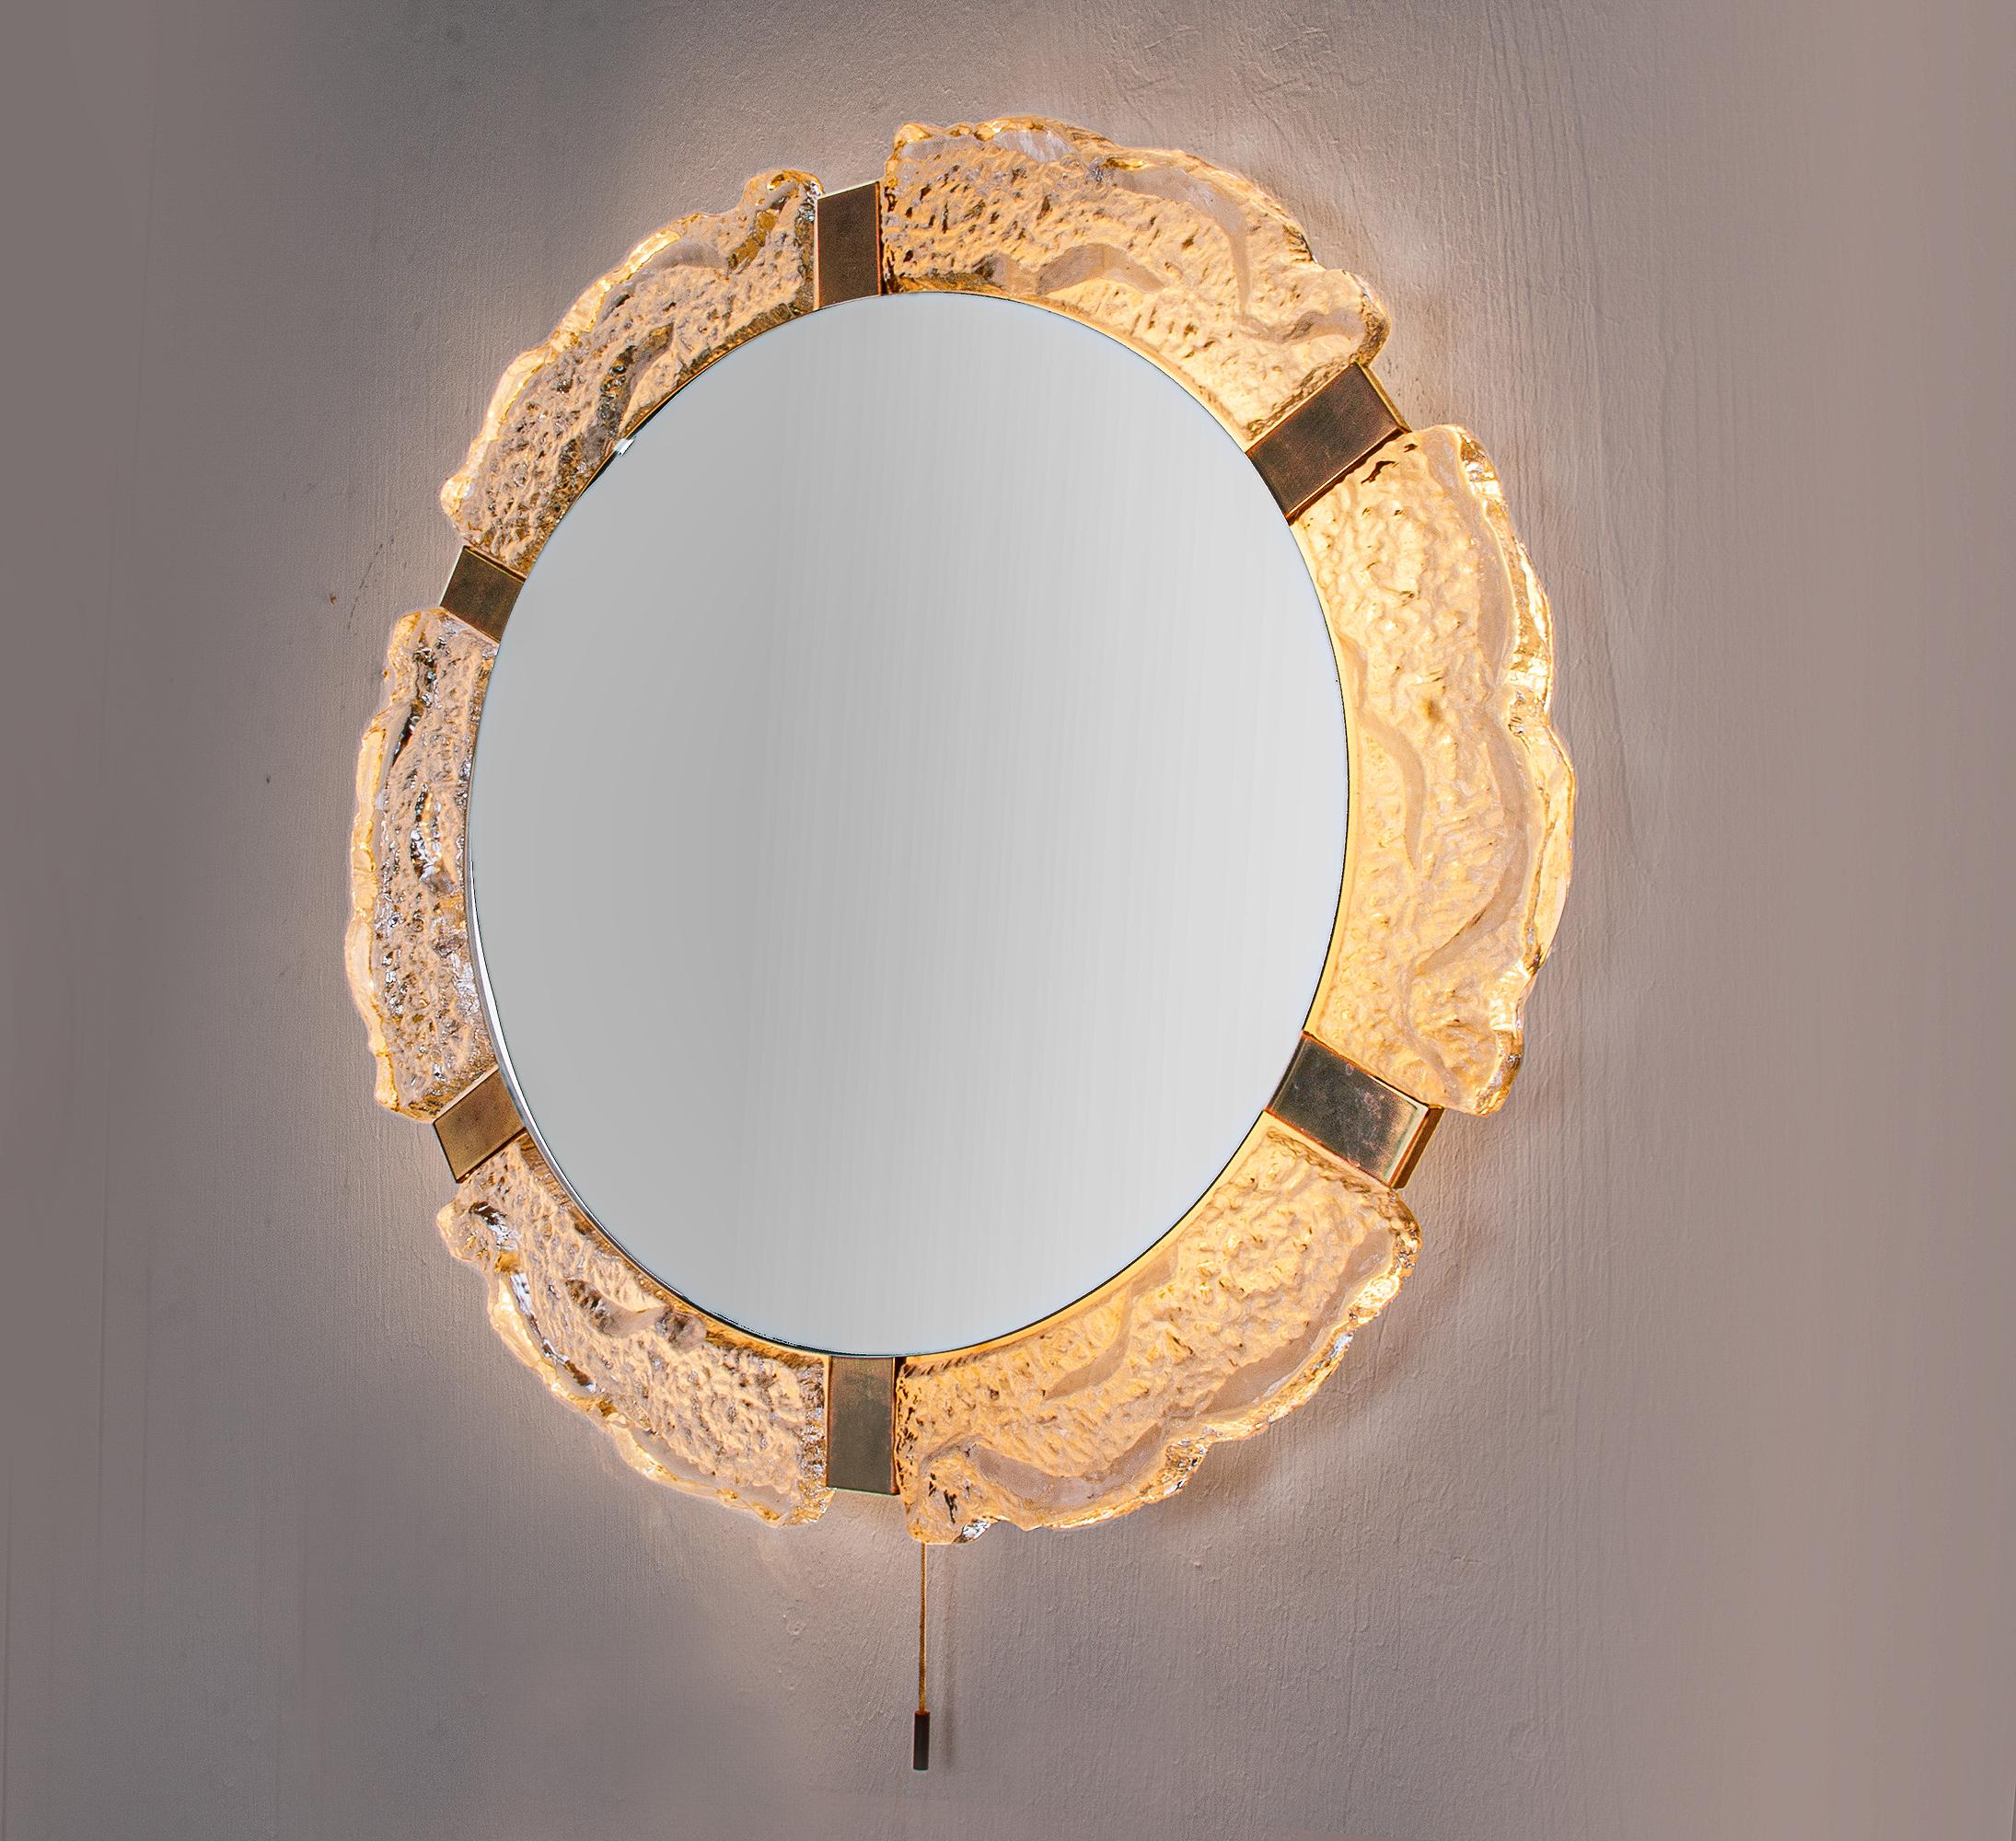 Elegant illuminated background wall mirror. The frame is made of Murano ice glass with brass hardware. Manufactured by J.T. Kalmar, Austria in the 1960s. 

Measures: diameter 21.65” in. (55 cm), depth 3.9” in. (10 cm). 
Lighting: takes four small